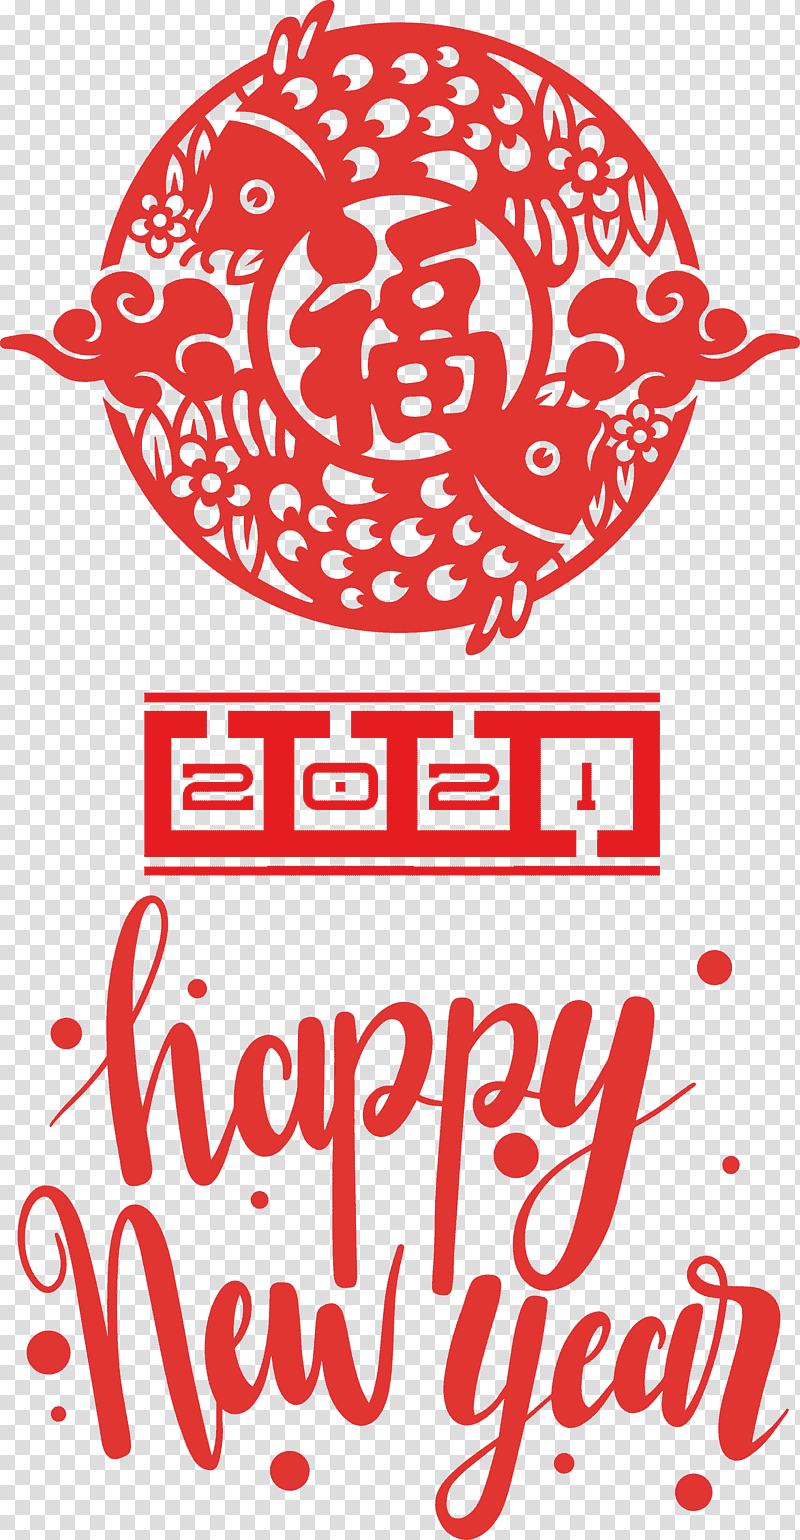 Happy Chinese New Year 2021 Chinese New Year Happy New Year, New Years Day, 2021 Happy New Year, Christmas Day, Holiday, Nowruz, New Years Eve transparent background PNG clipart